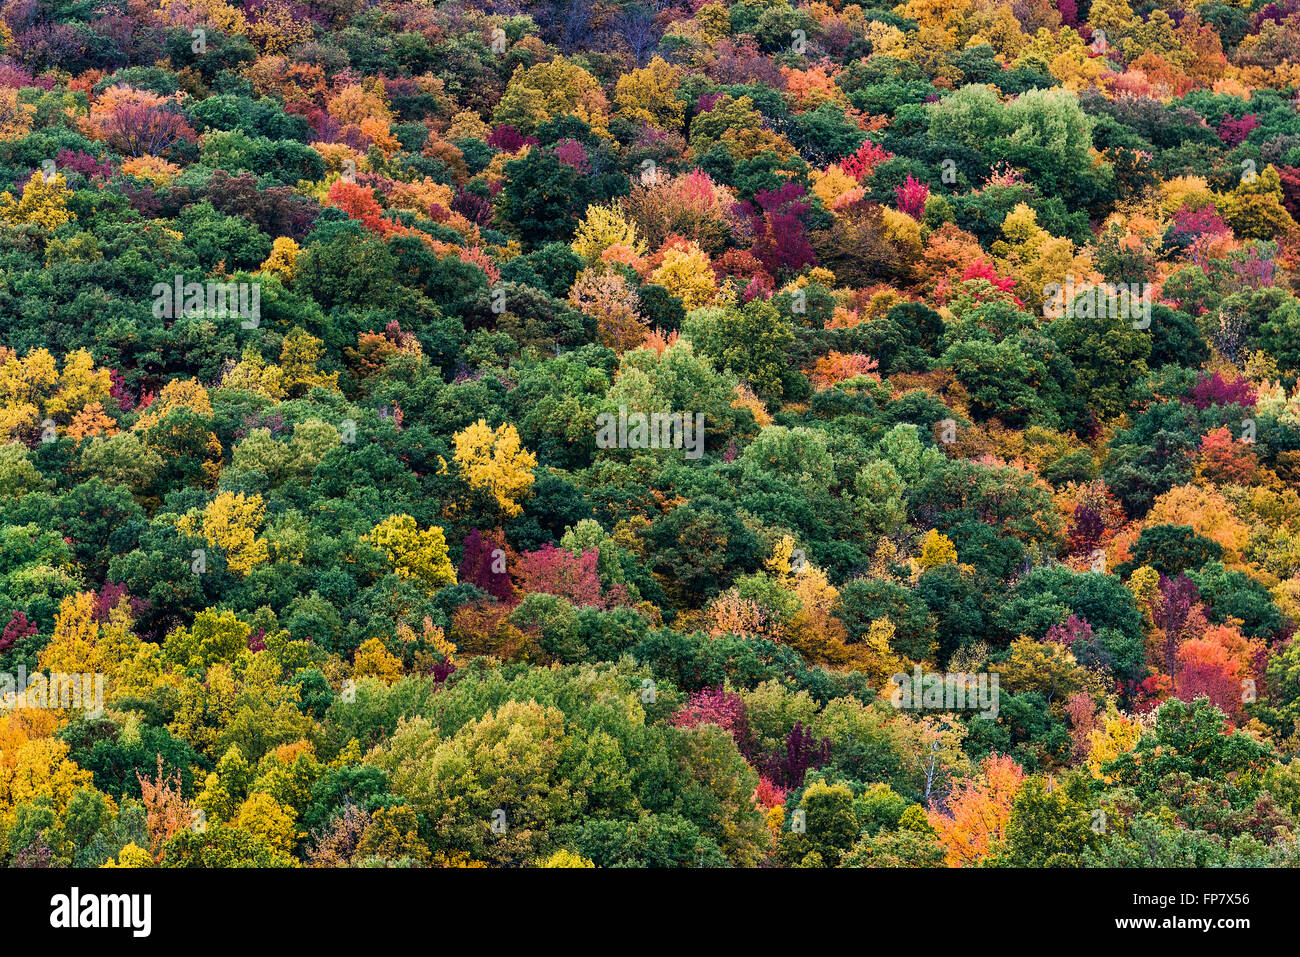 Abstract of colorful autumn trees on a mountainside, West Rutland, Vermont, USA Stock Photo